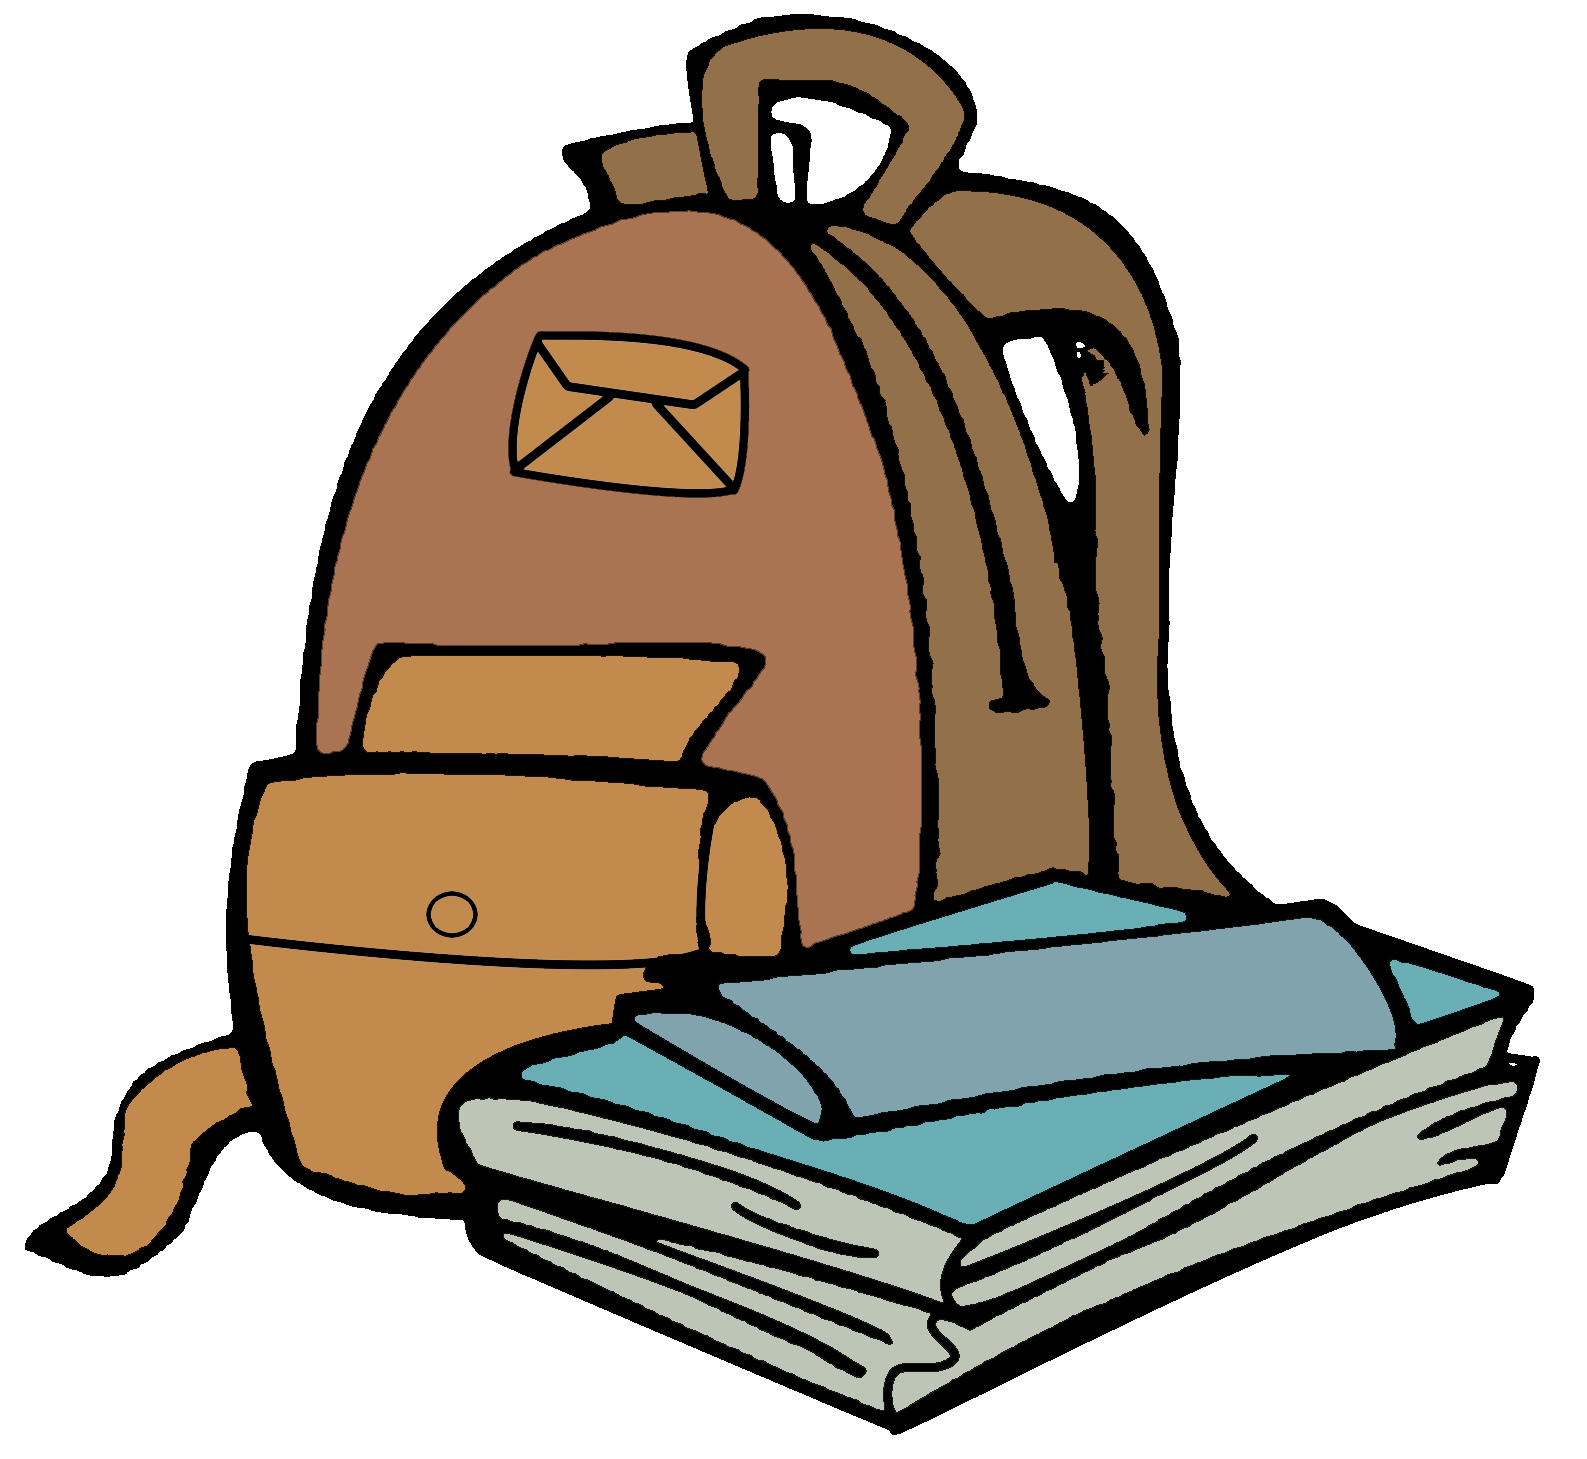 Backpack Image Image Of A Red Backpack Clipart